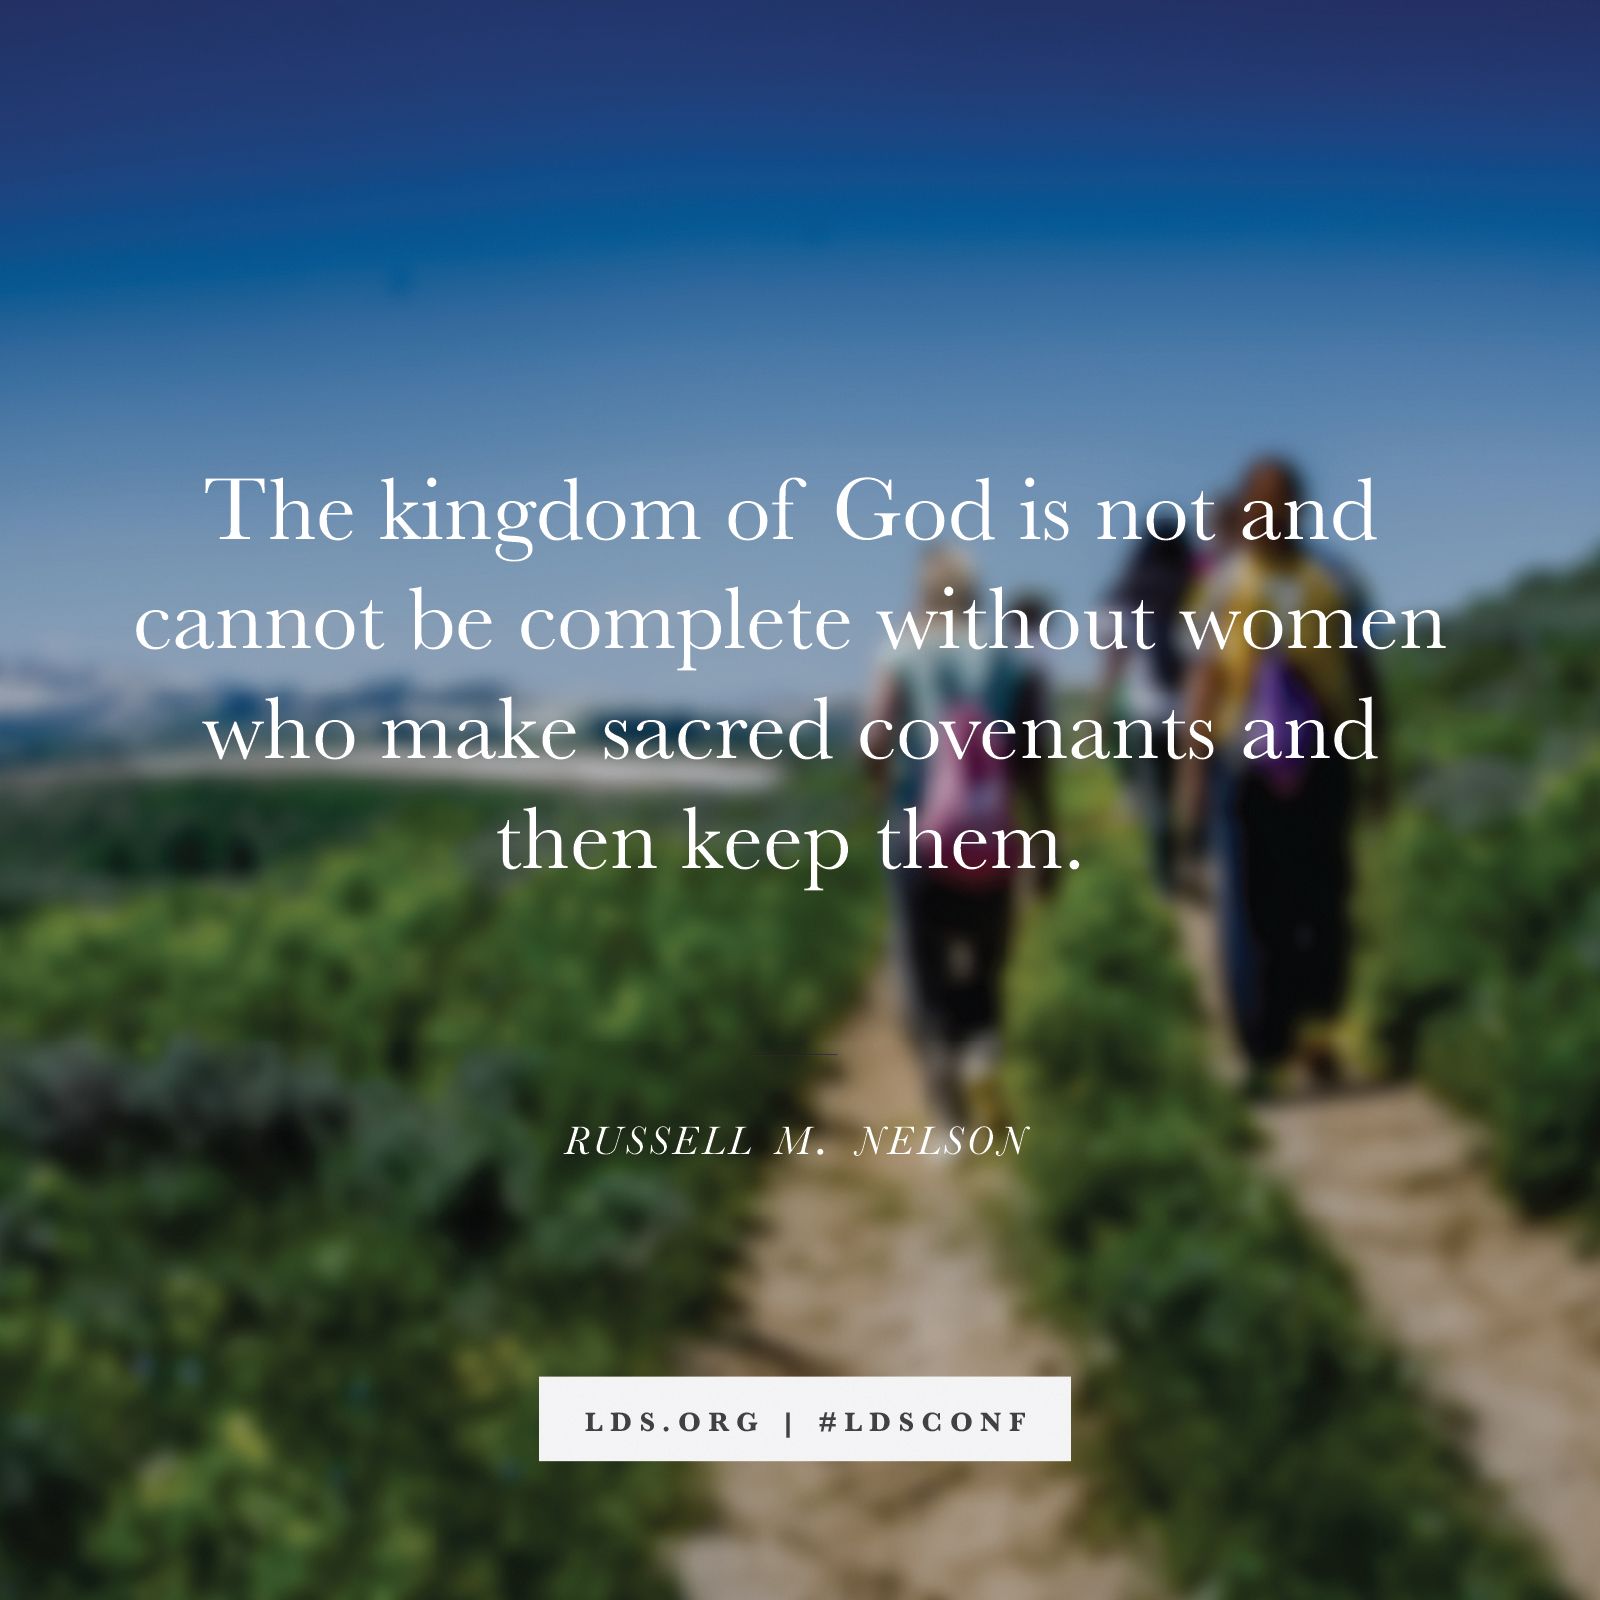 “The kingdom of God is not and cannot be complete without women who make sacred covenants and then keep them.” —President Russell M. Nelson, “A Plea to My Sisters”